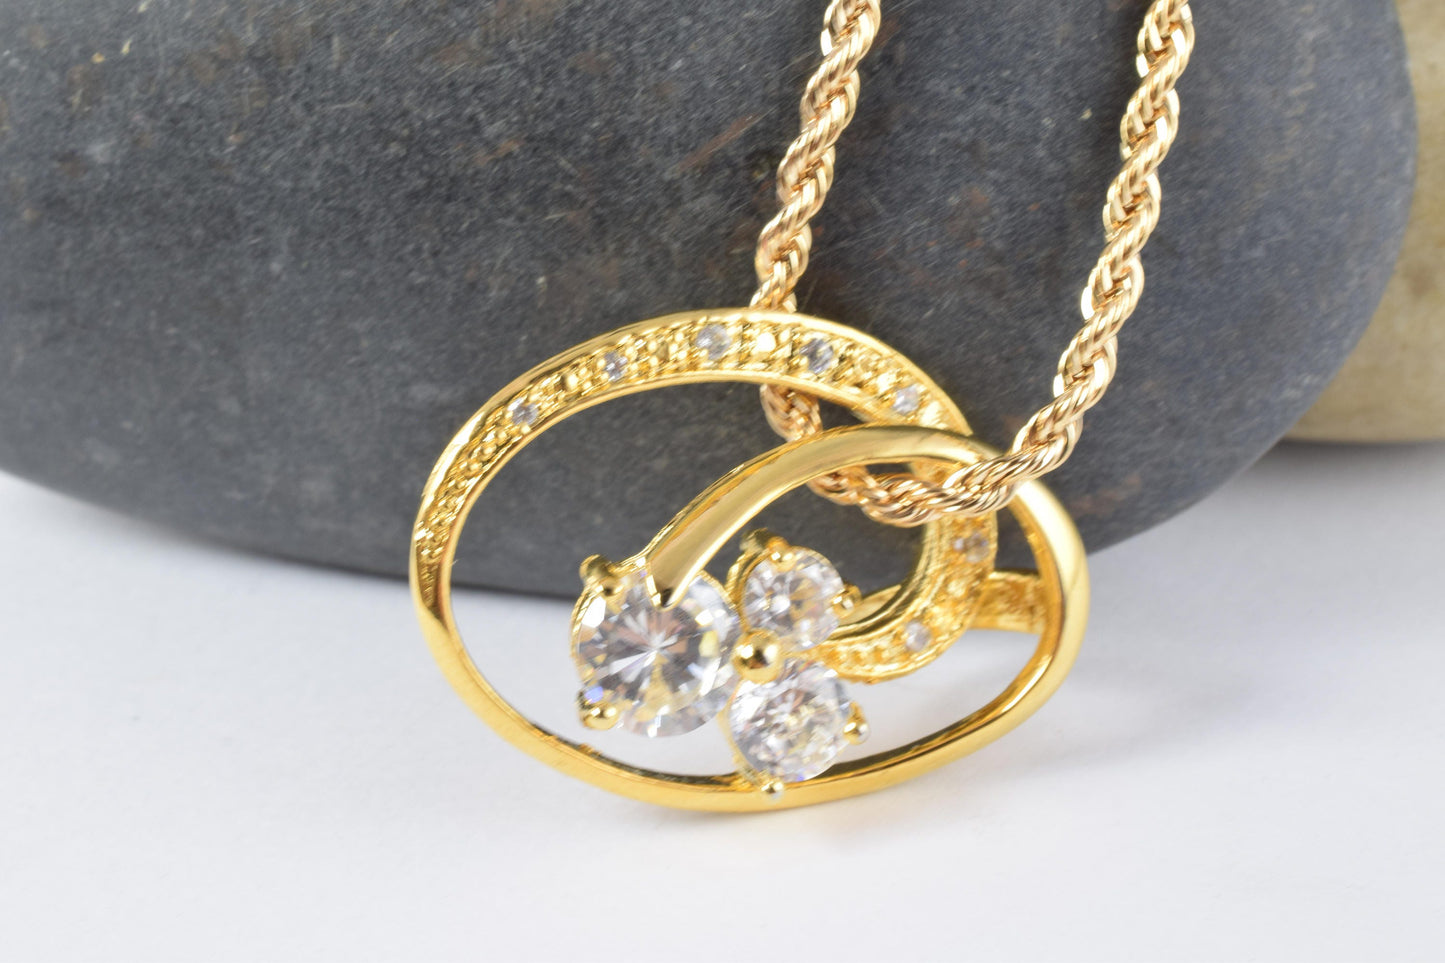 24x32mm 18KT Gold Filled CubicZirconiaCircle Pendant Elegant Design Infinity Round Cubic Zirconia Crystal, Gold Filled Pendant,Jewelry Charm